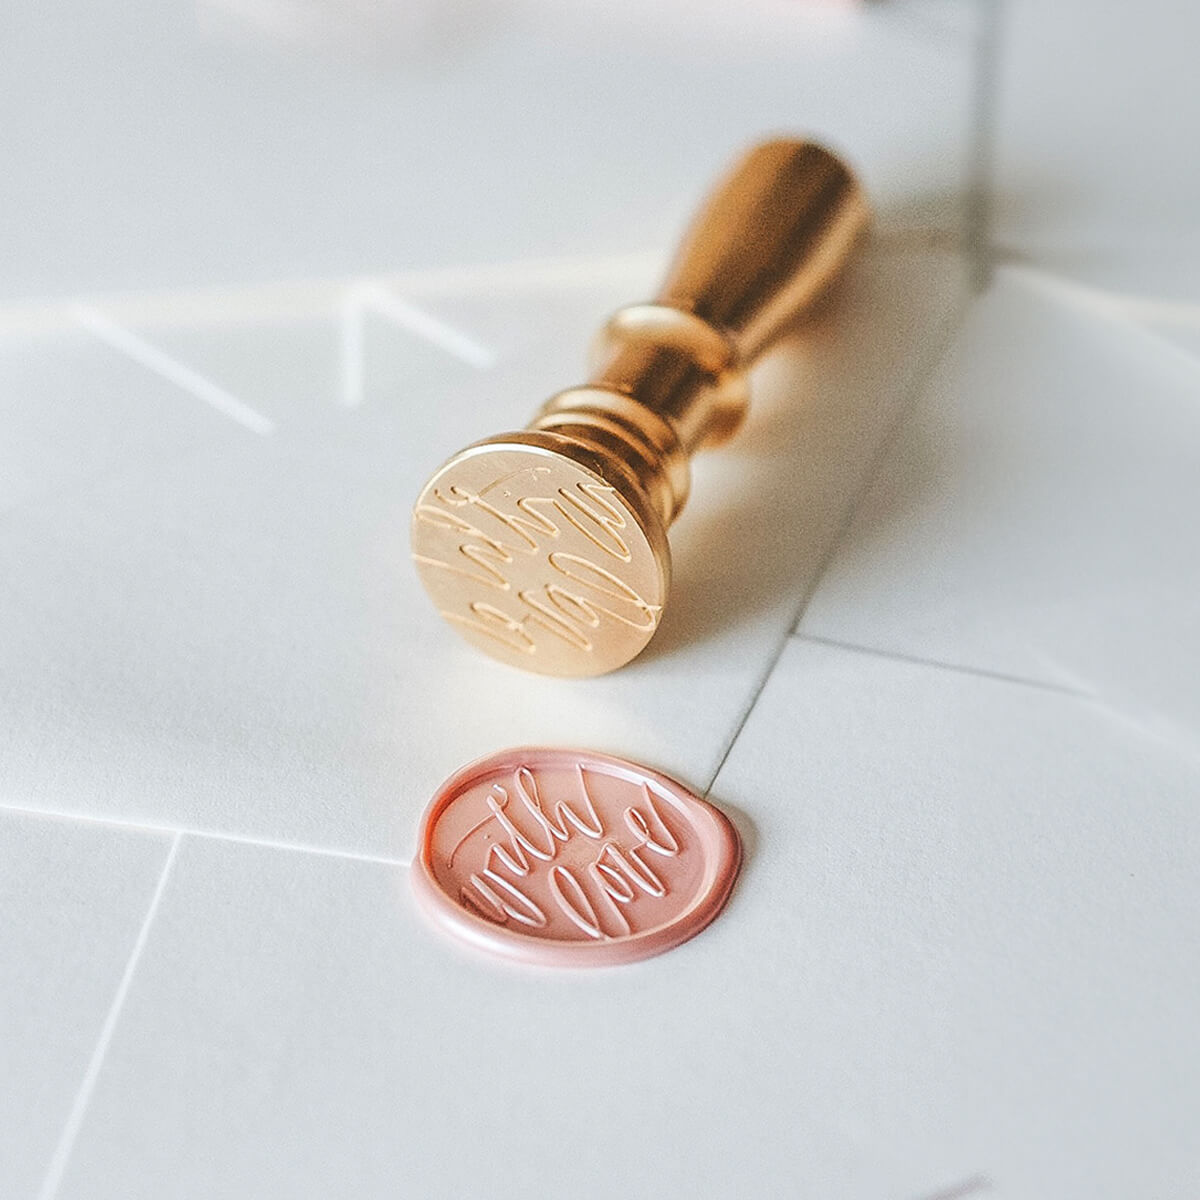 Custom Your Own Design Wax Seal Stamp